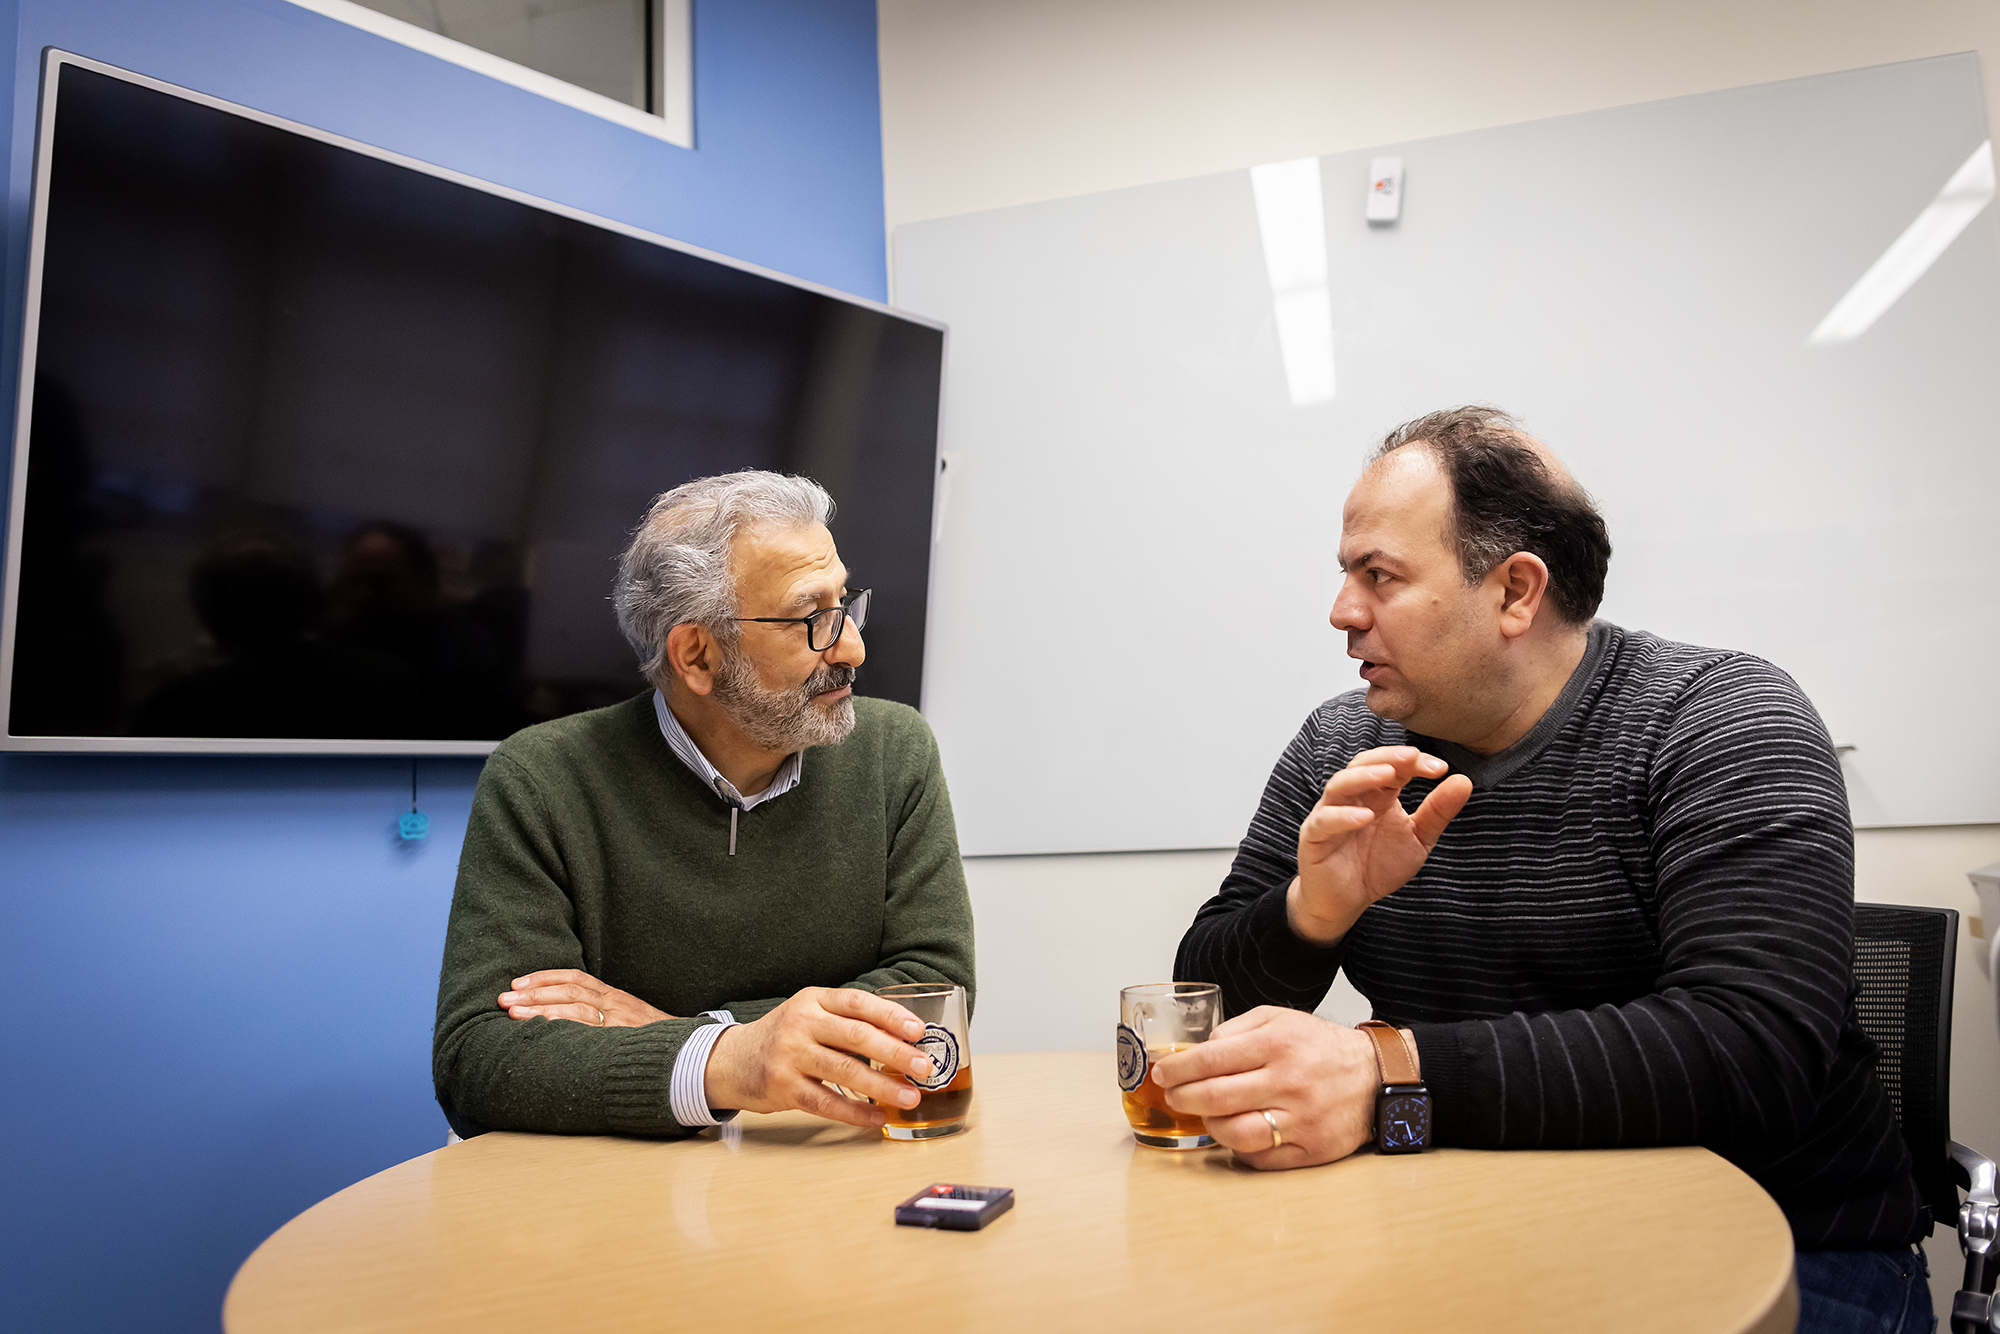 Nader Engheta and Firooz Aflatouni seated at a table drinking tea from Penn-branded mugs.